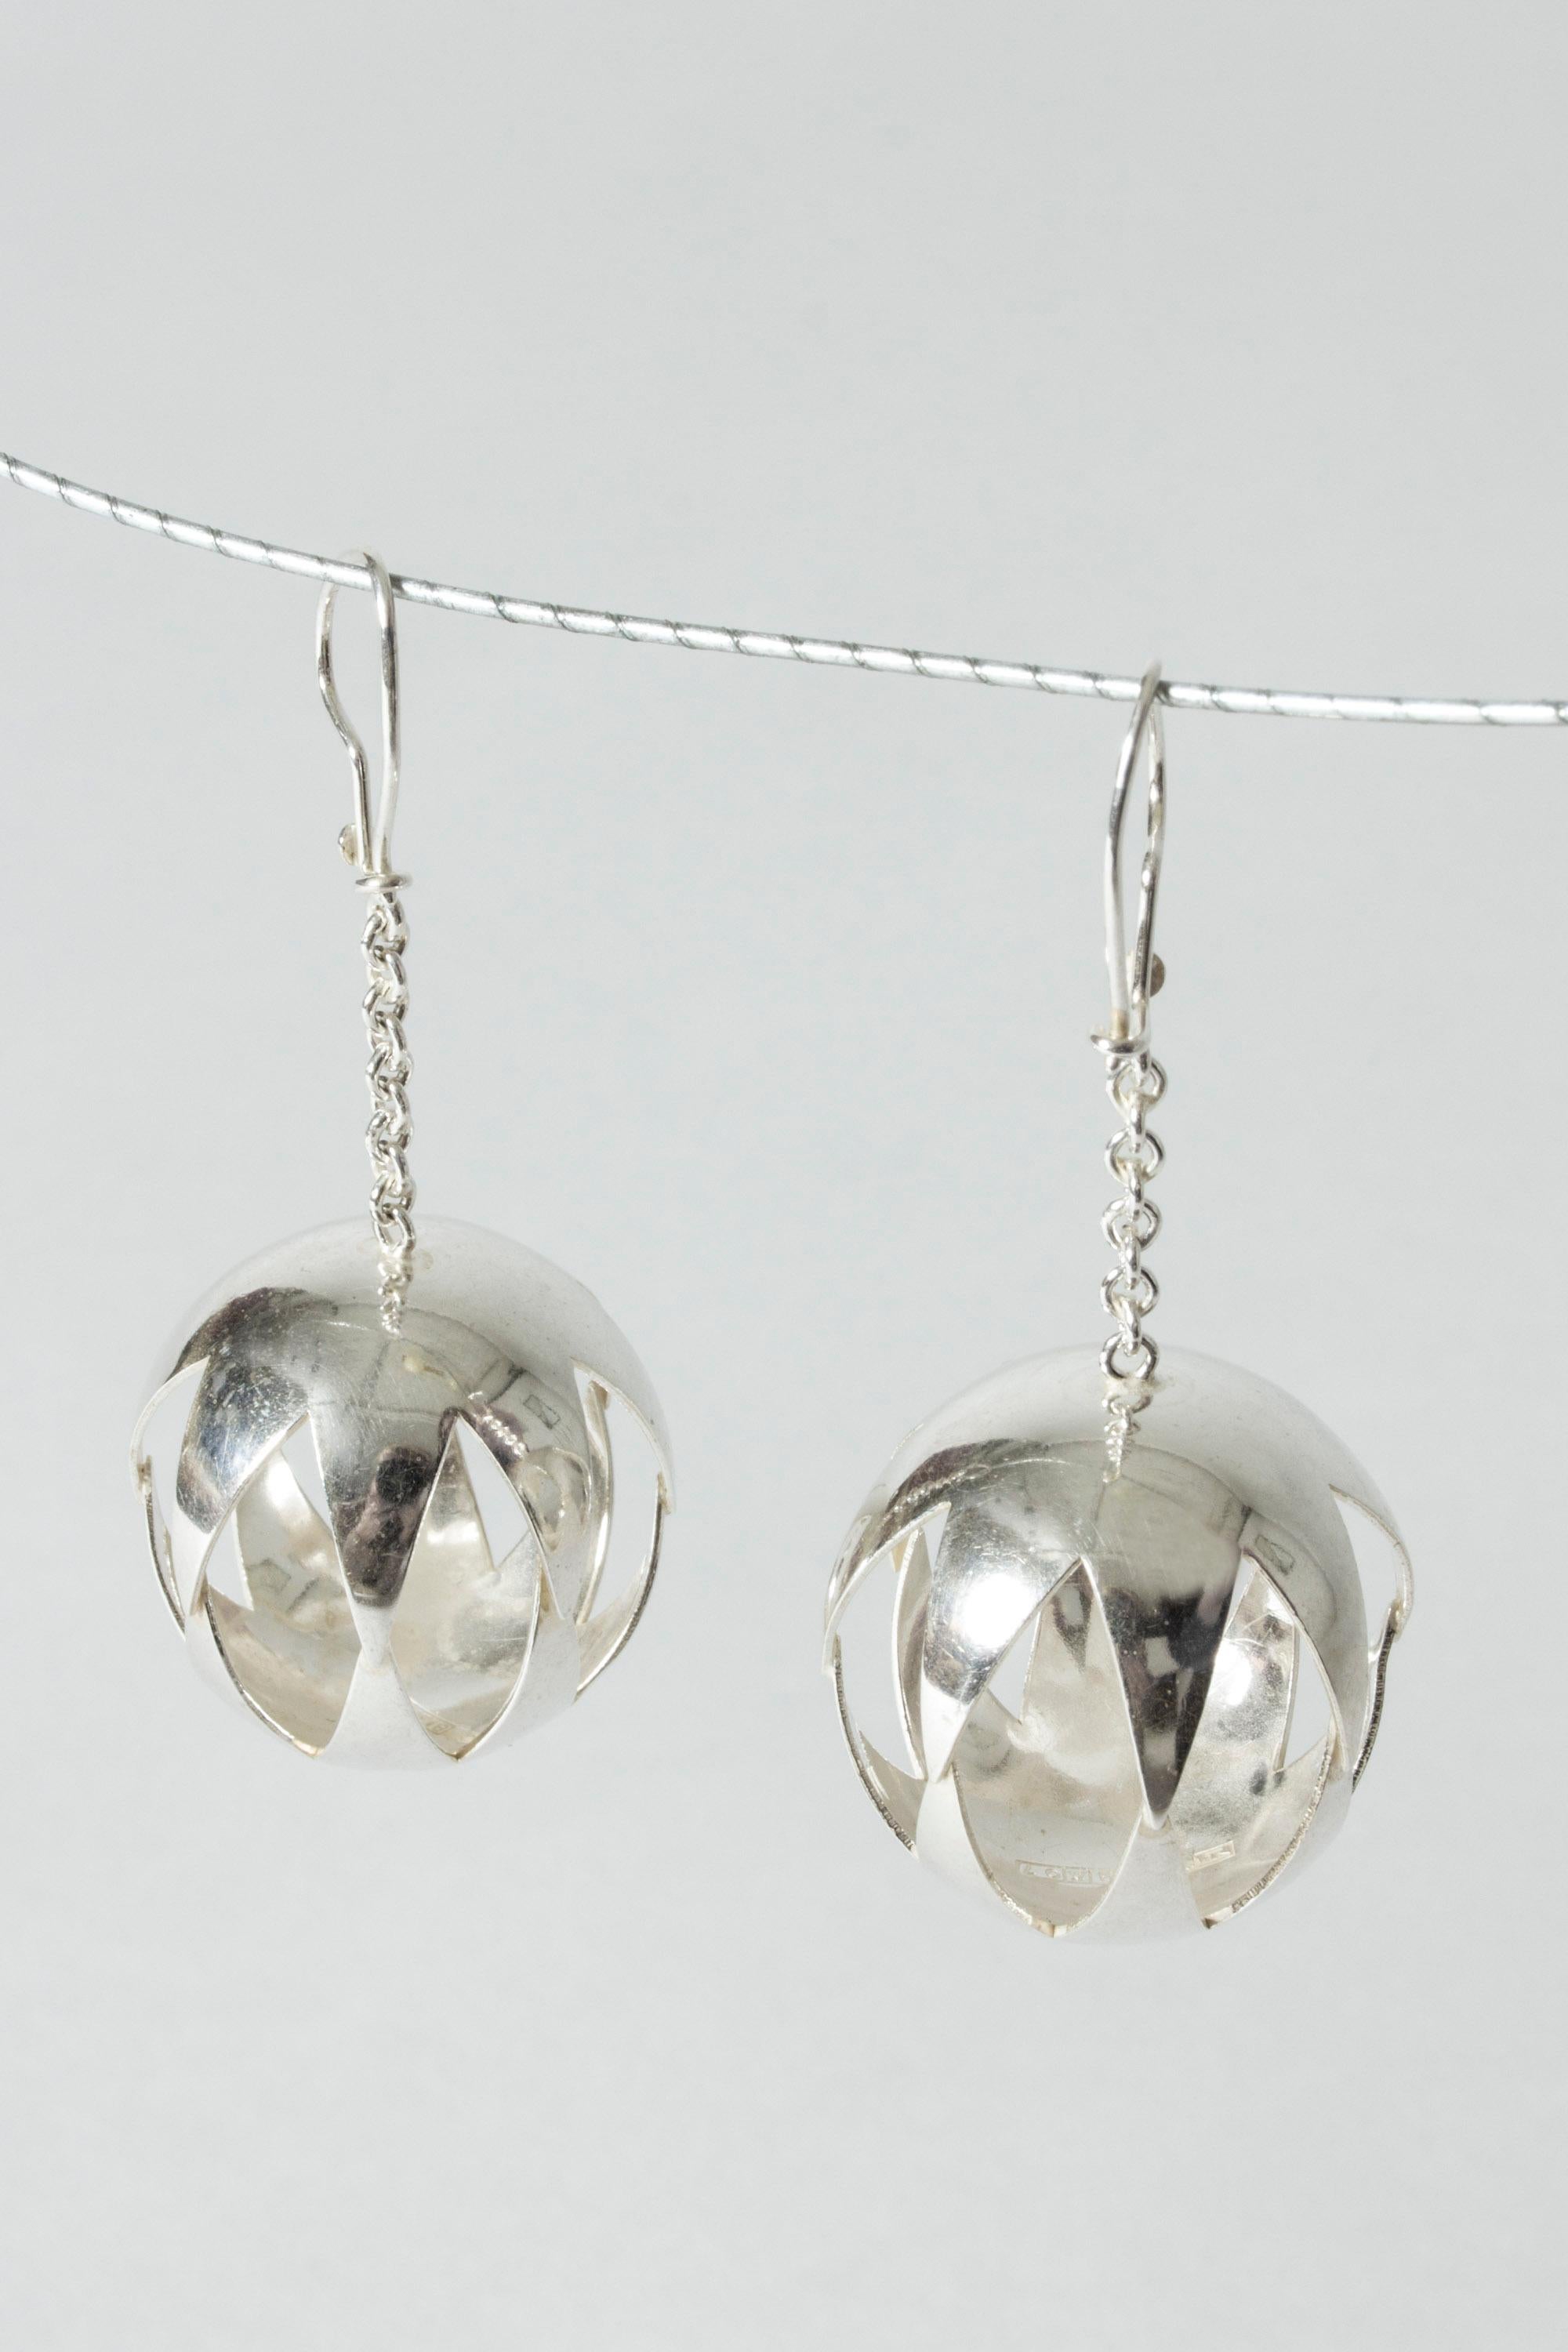 Pair of amazing, oversized earrings by Elis Kauppi. Two large spheres, cutout with a graphic diamond pattern. Fun, beautifully made statement pieces.